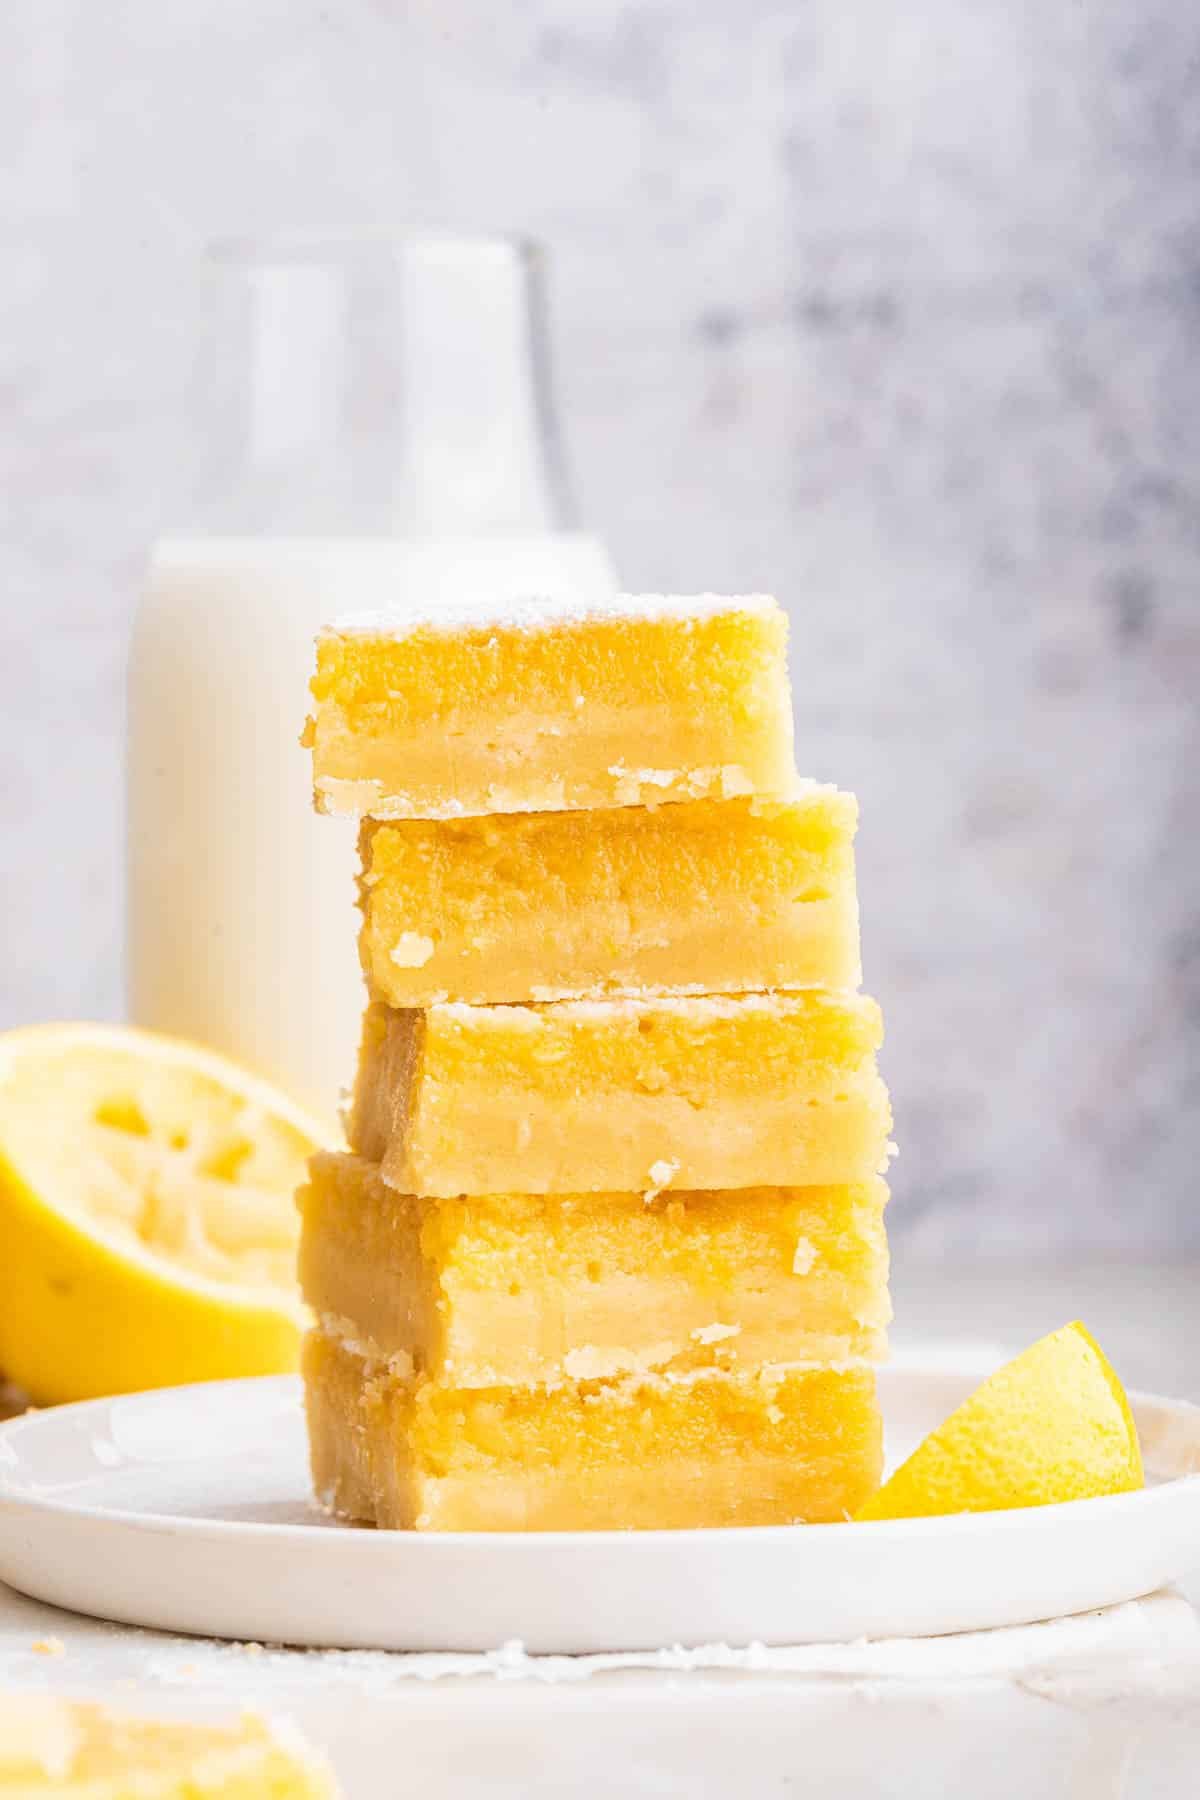 A stack of five lemon bars on a white plate with milk in the background.